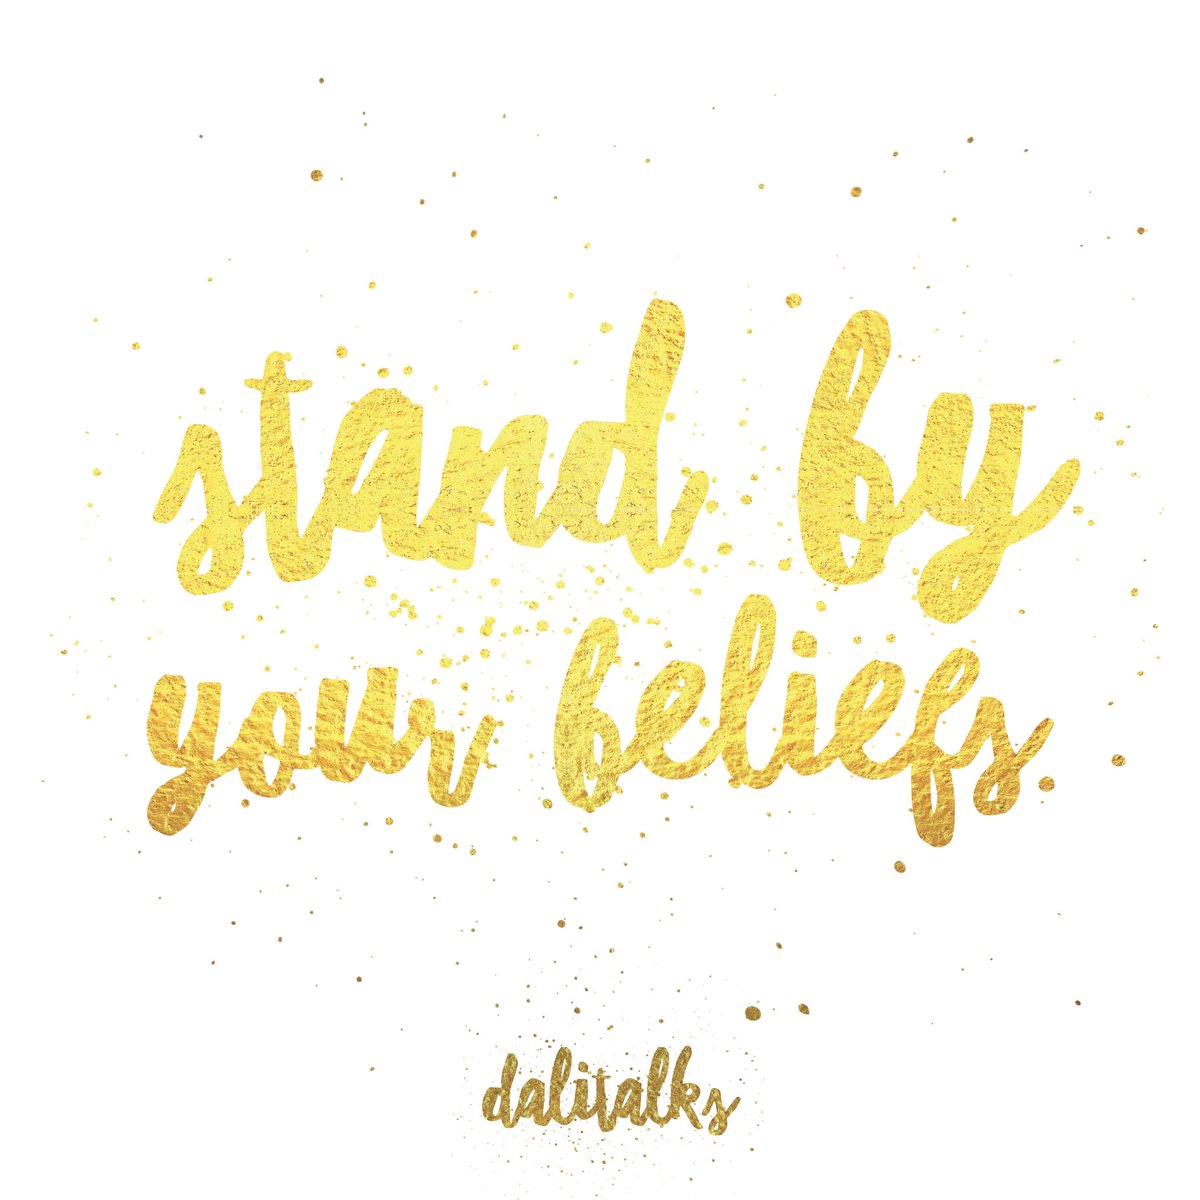 Stand by your beliefs. #DreamBig #StayTrueToYourself #DaliTalks #BeAGoodExample #BeYourBestSelf #EmbracingDifferences #DebunkingStereotypes